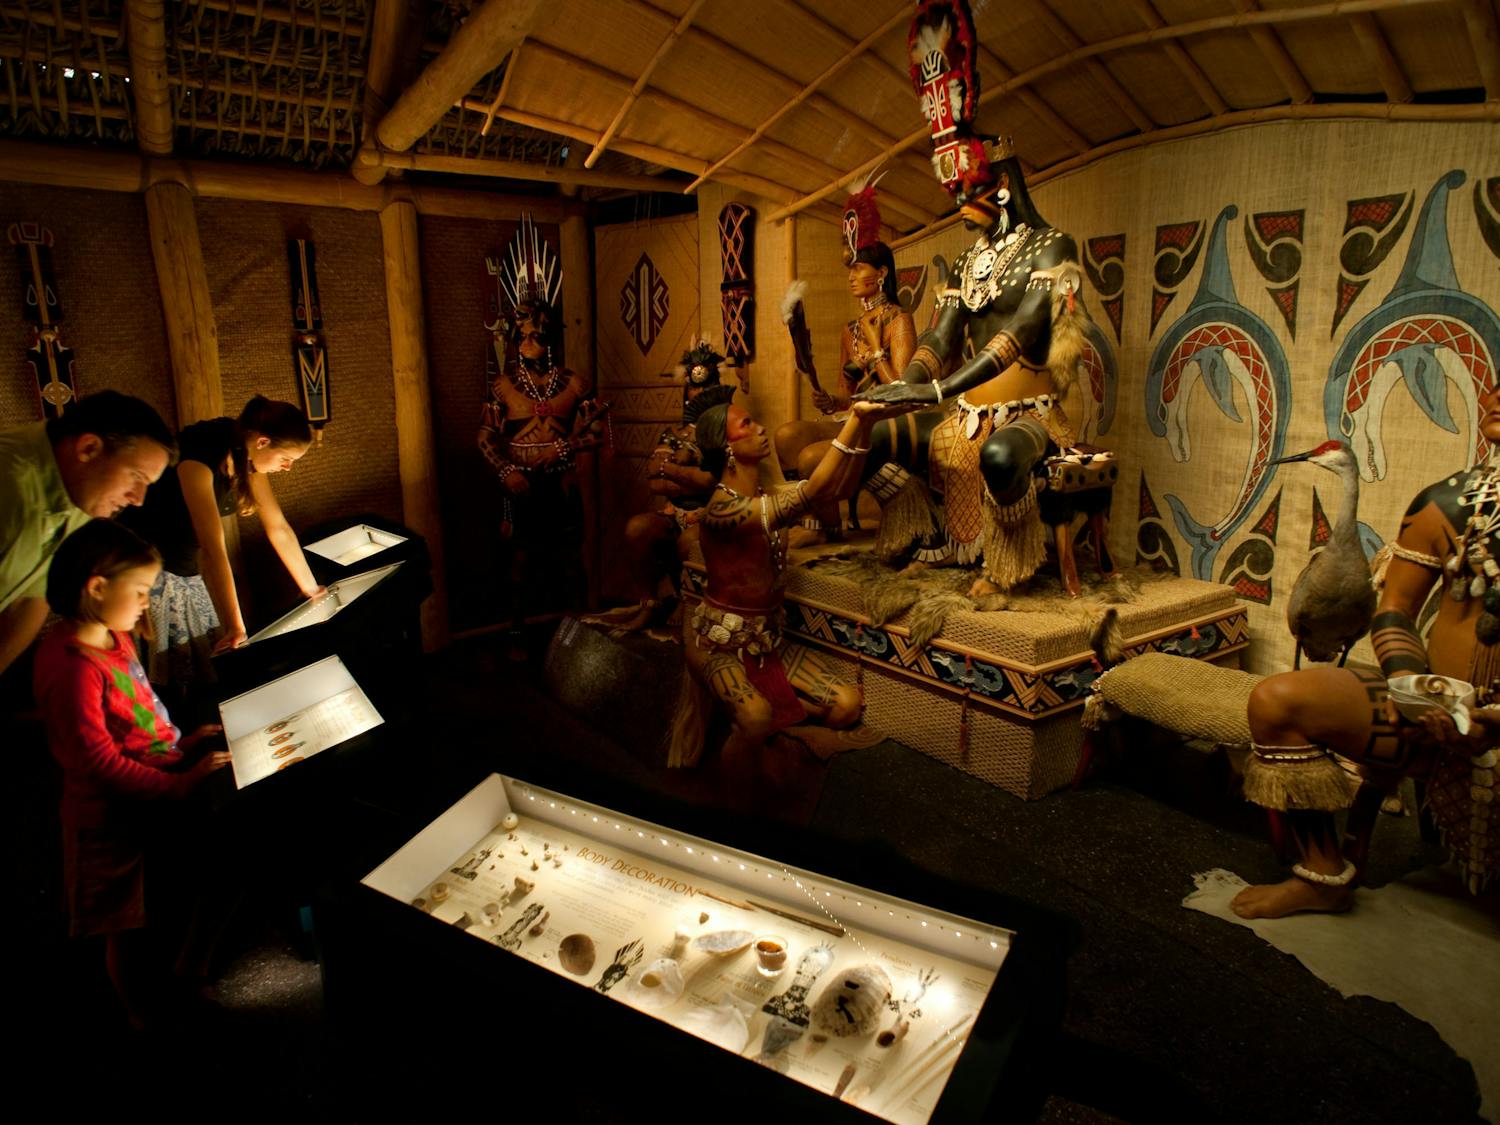 The Florida Museum of Natural History "Southwest Florida People and Environments" permanent exhibit features a Calusa Indian welcoming ceremony set in the 1500s and designed based on written accounts. The Calusa ruled southwest Florida at the time of European contact. Florida Museum of Natural History photo by Eric Zamora